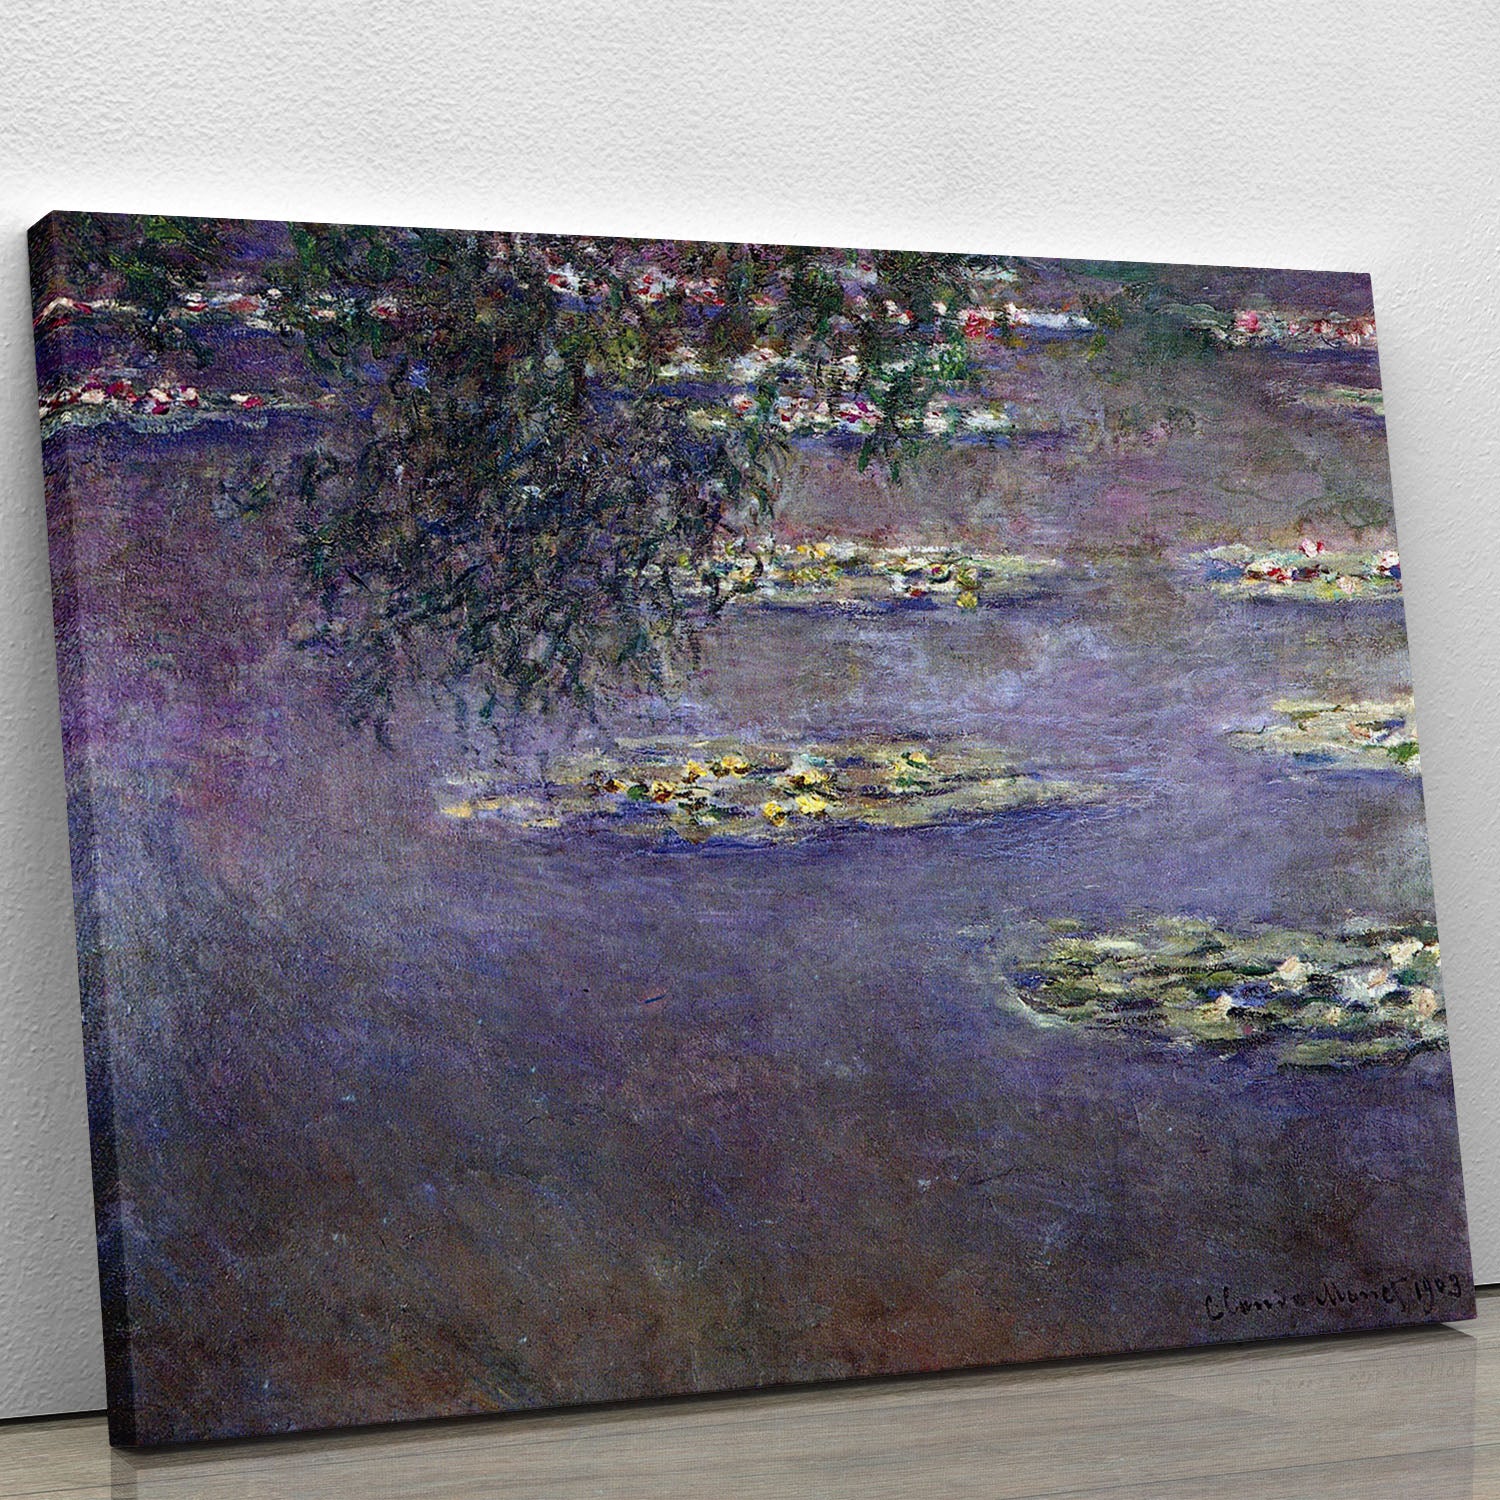 Water lilies water landscape 1 by Monet Canvas Print or Poster - Canvas Art Rocks - 1